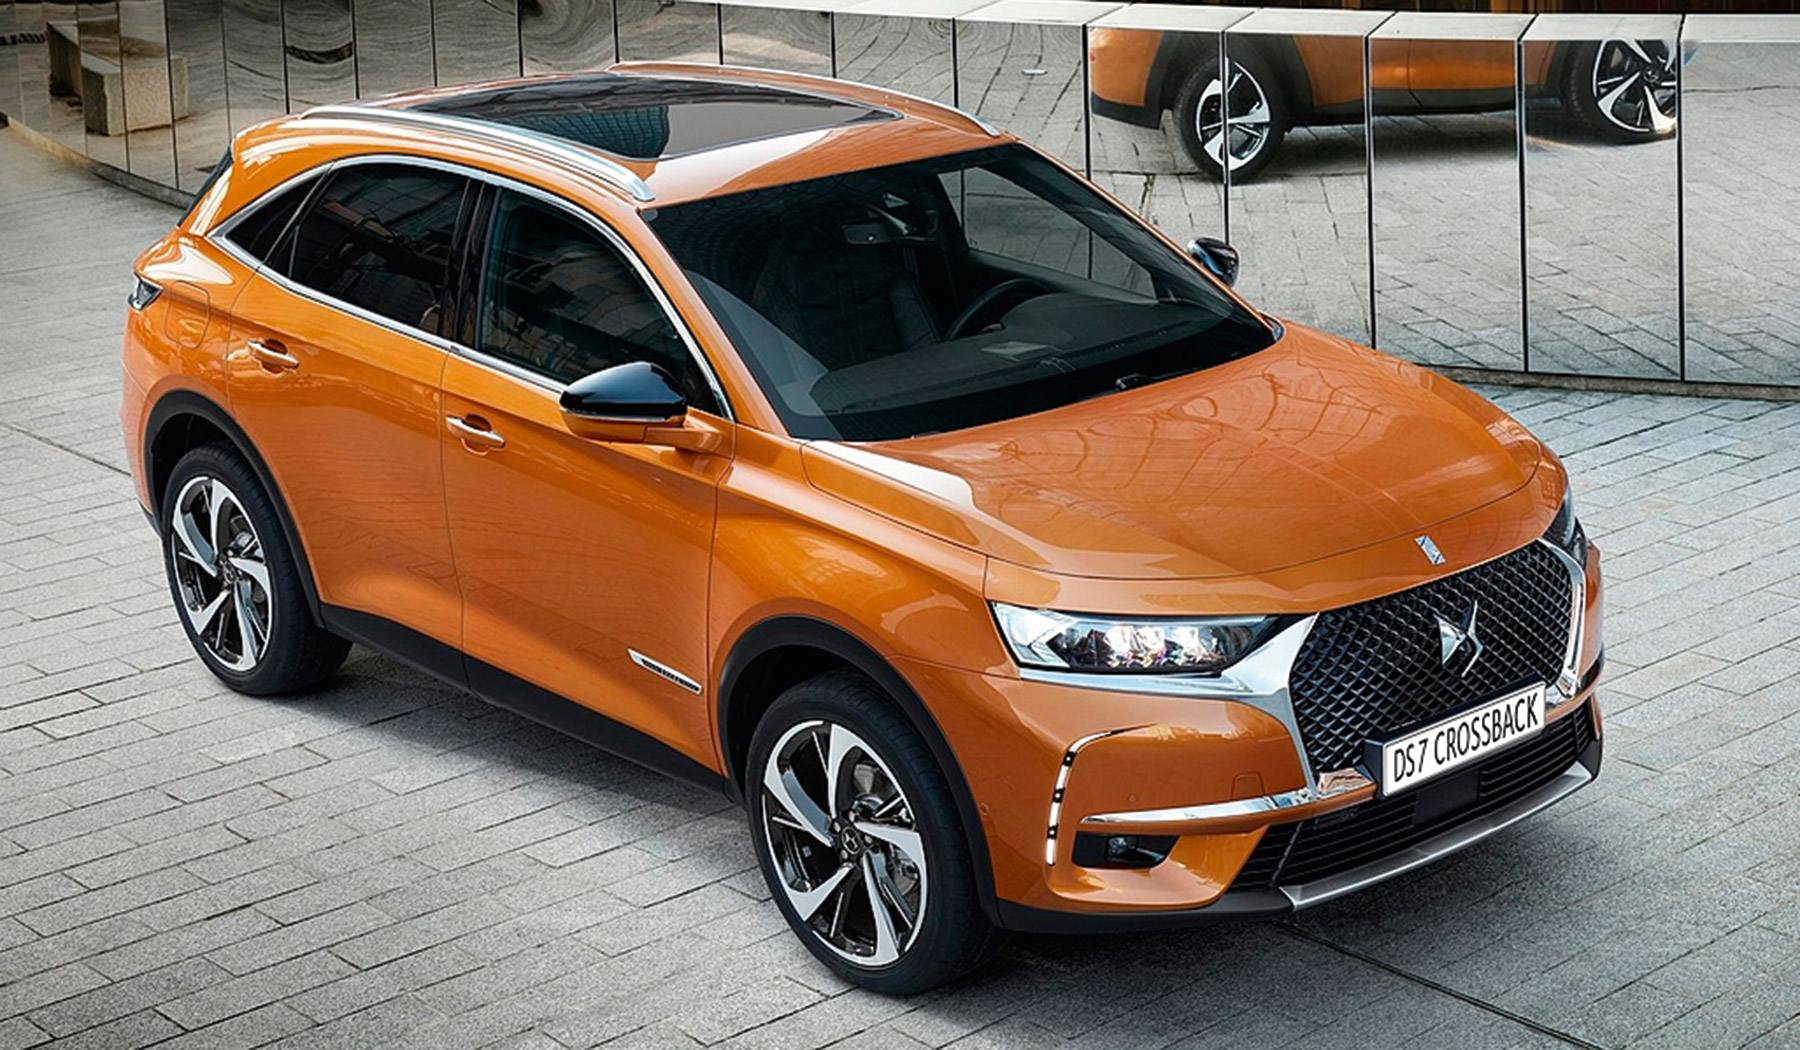 DS7 Crossback: glamour